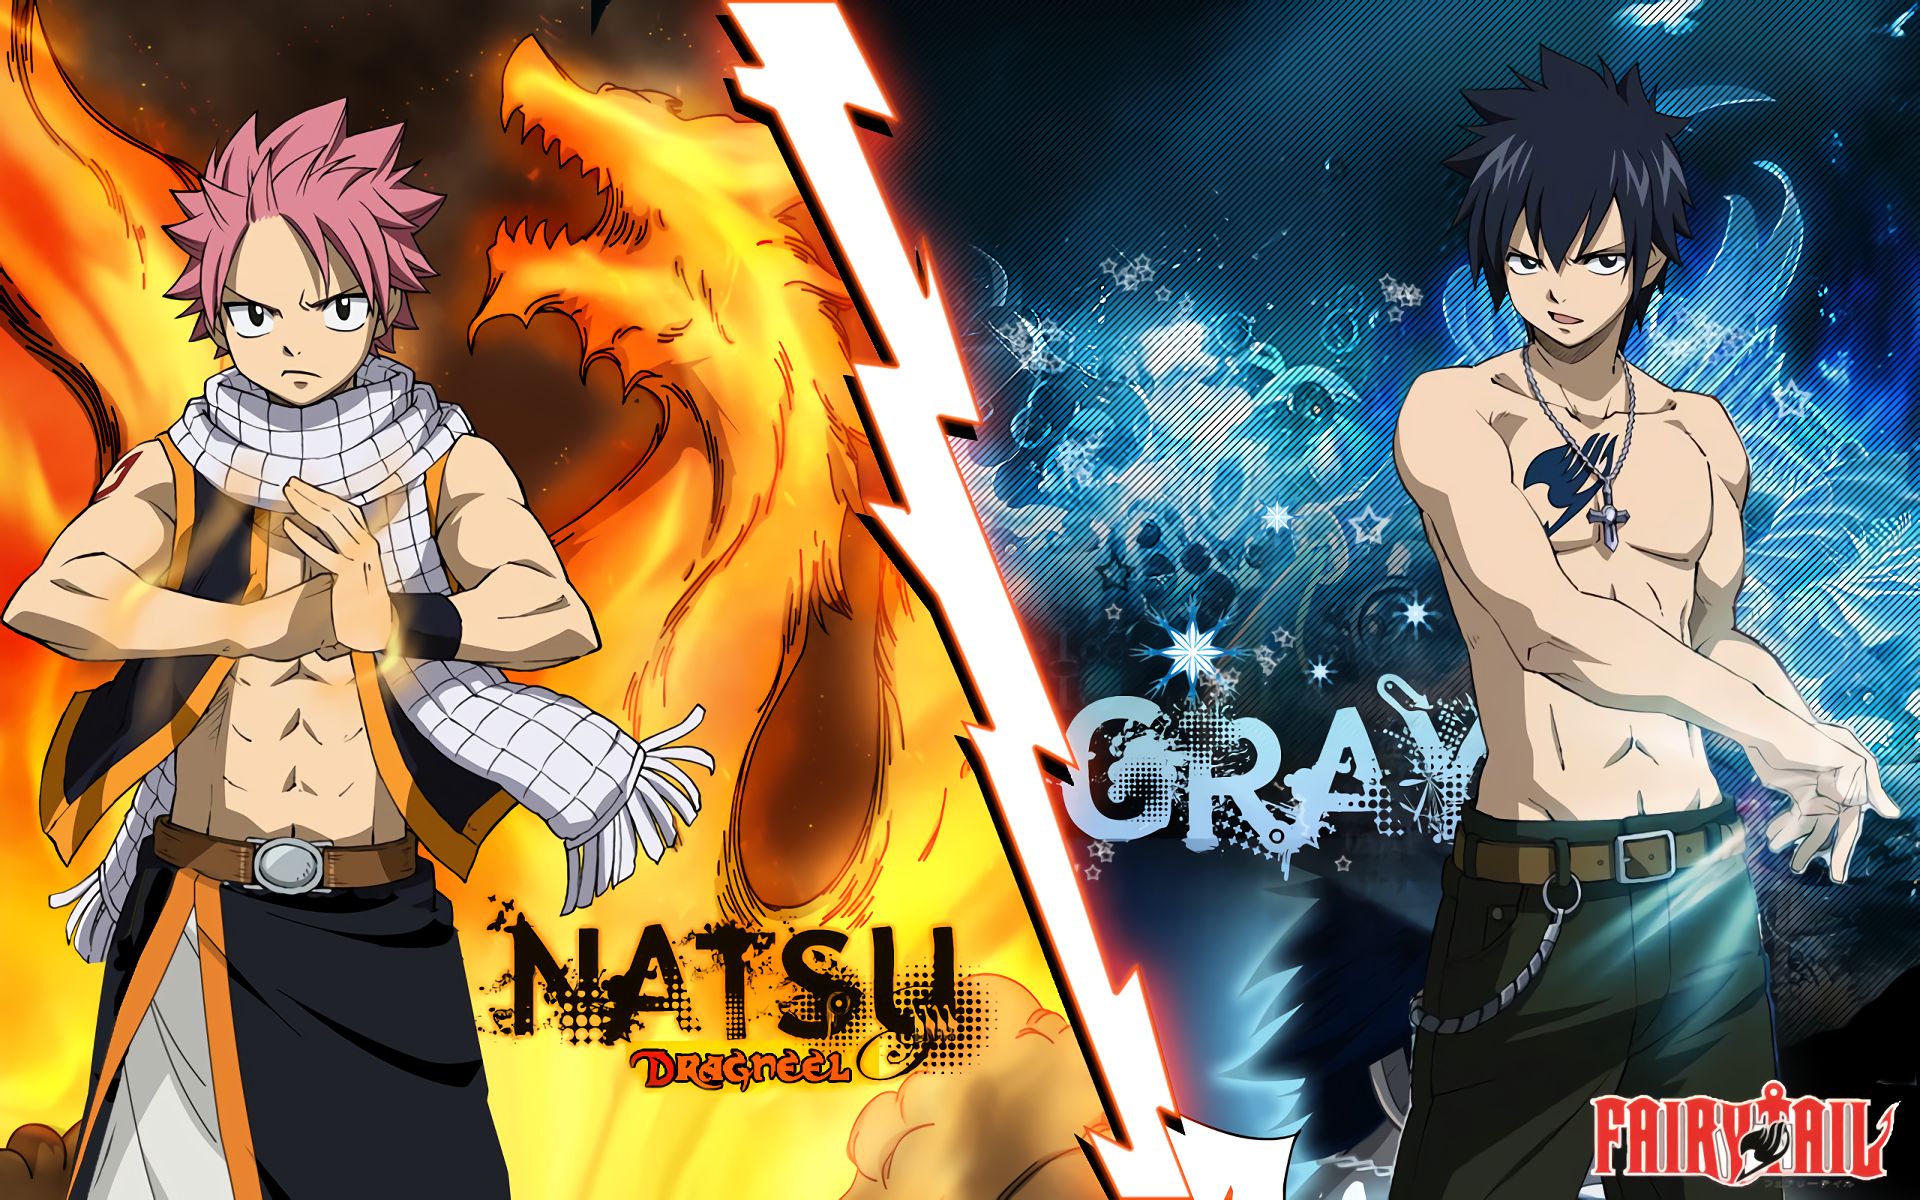 Anime Fairy Tail HD Wallpapers For Desktop - Wallpaper Cave